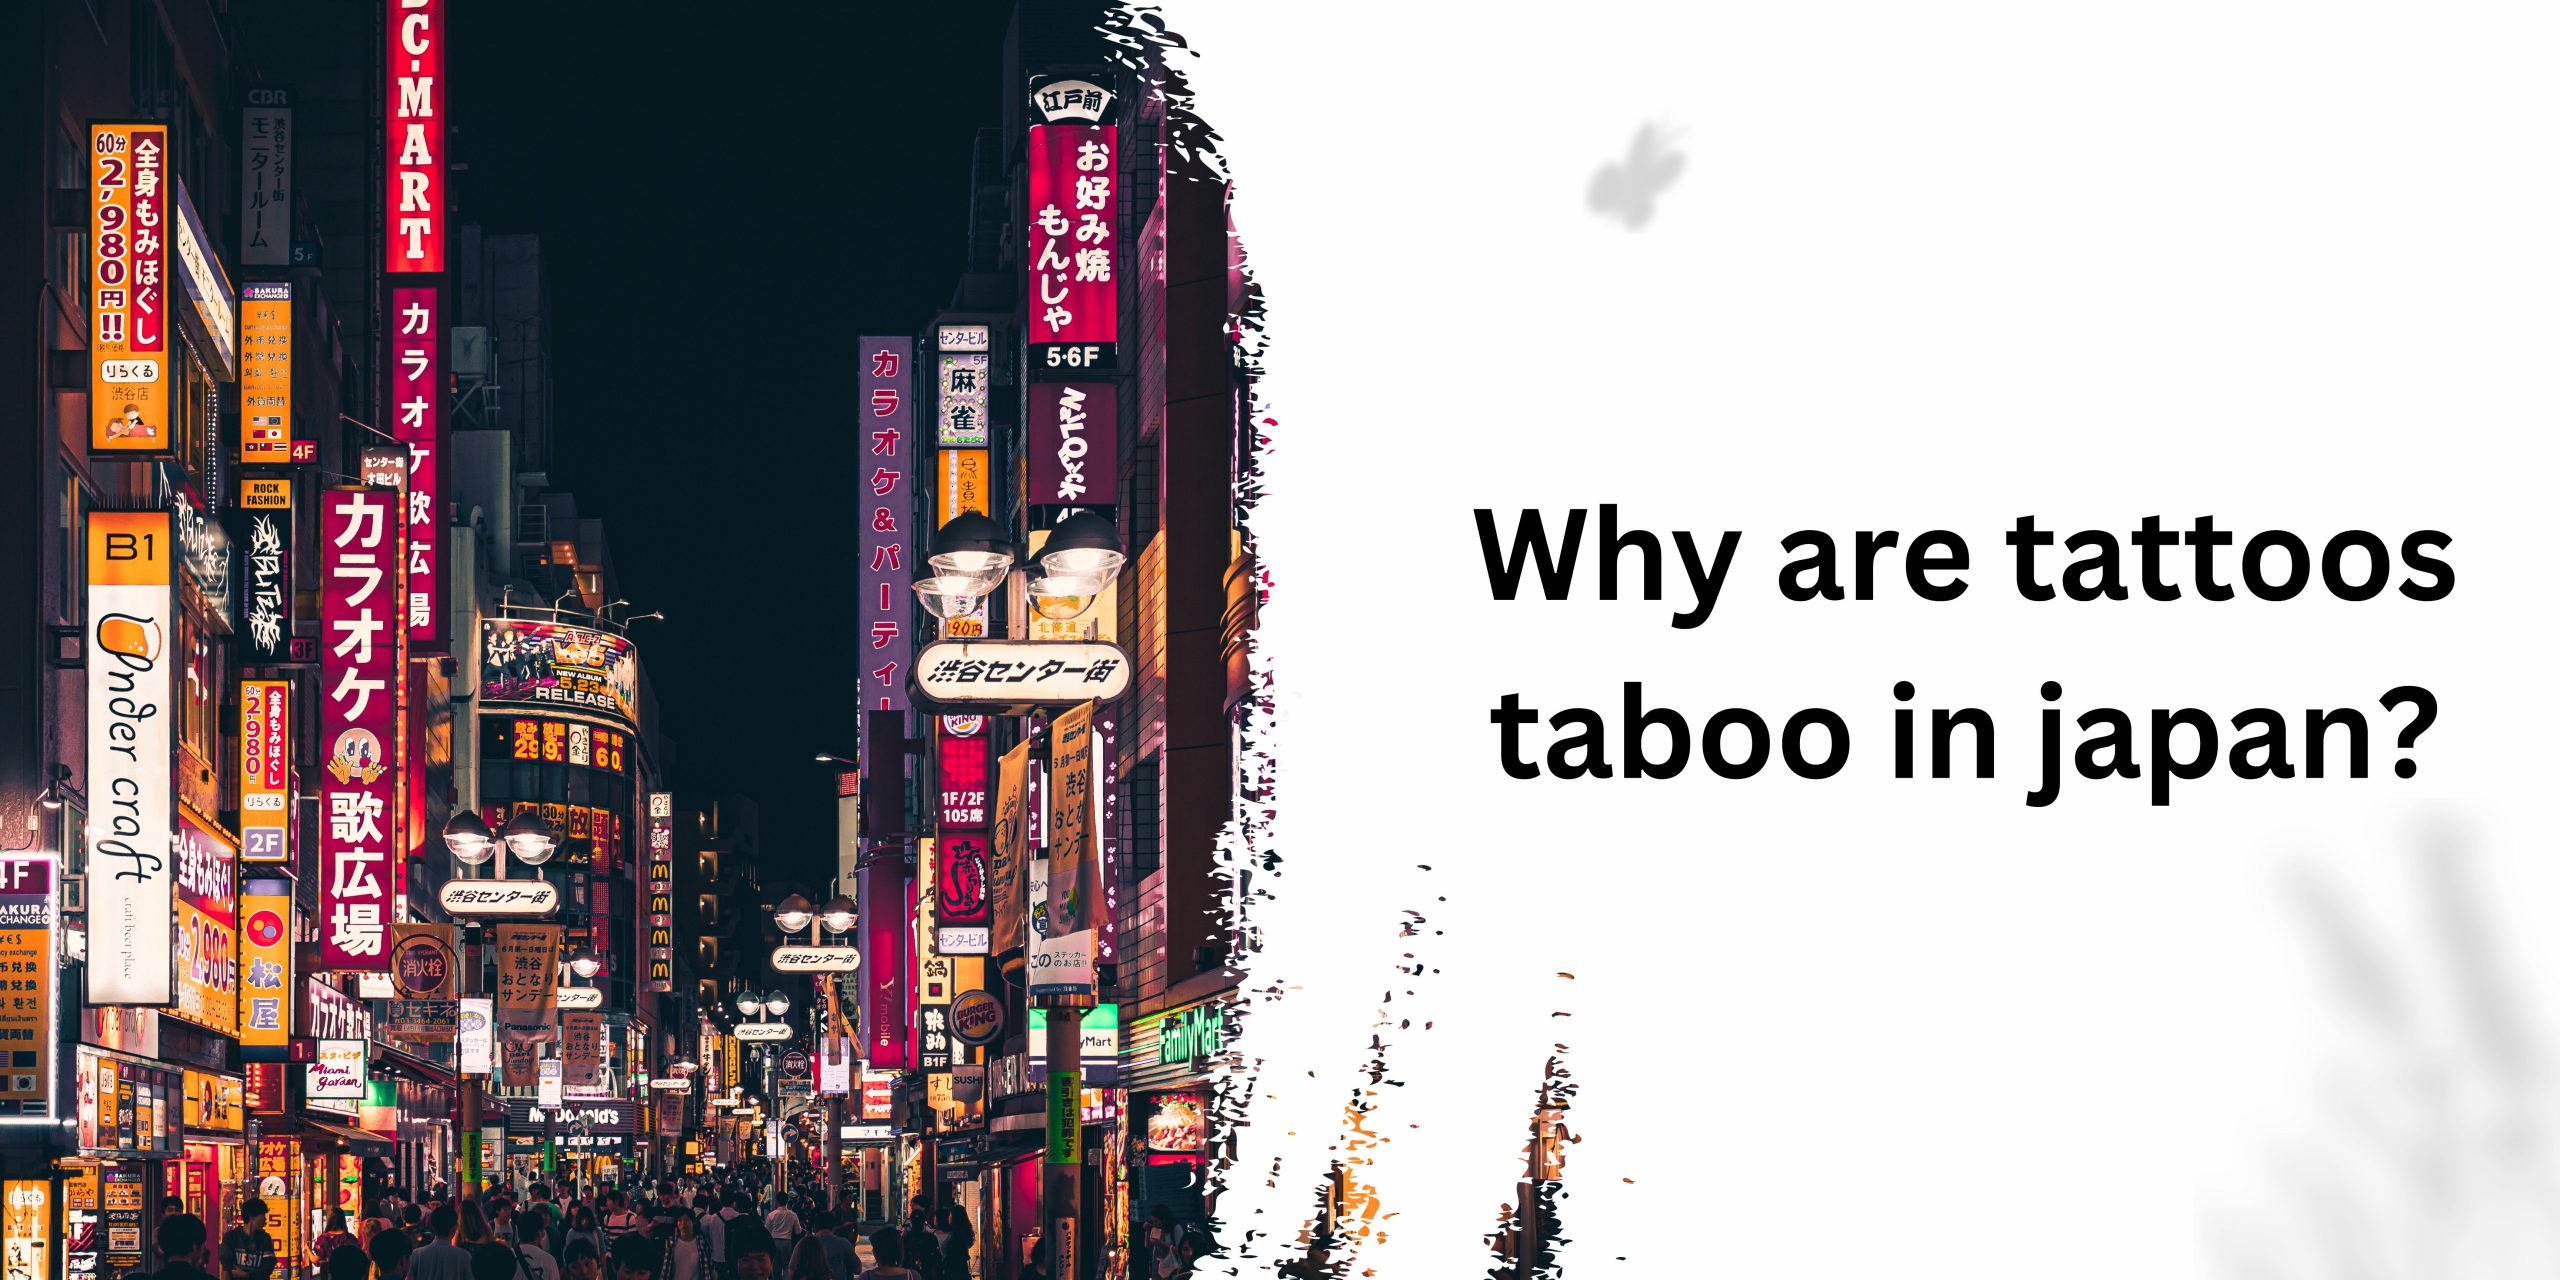 Why are tattoos taboo in Japan